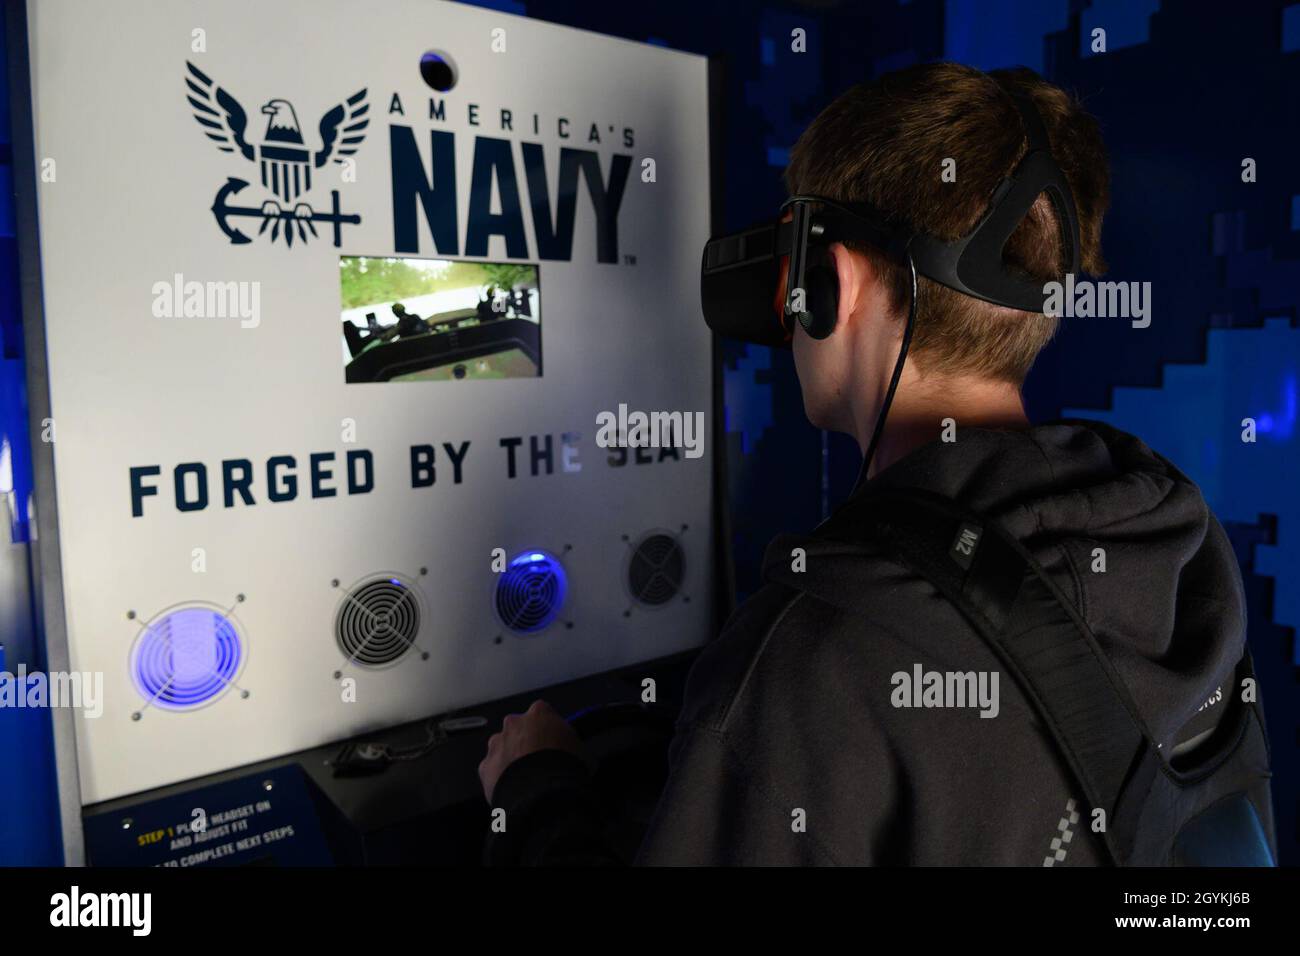 200120-N-FS414-2337 LOS ANGELES (Jan 20, 2020) – A Six Flags Magic Mountain, Los Angeles, California park guest experiences a special warfare mission in the “Burke” virtual reality exhibit during the Los Angeles Swarm. A Swarm event is a large-scale recruiting effort run by the nation’s top Navy recruiters to saturate a specified market with Navy outreach, information and recruiting assets. (U.S. Navy photo by Mass Communication Specialist Seaman Apprentice Elijah Newton) Stock Photo